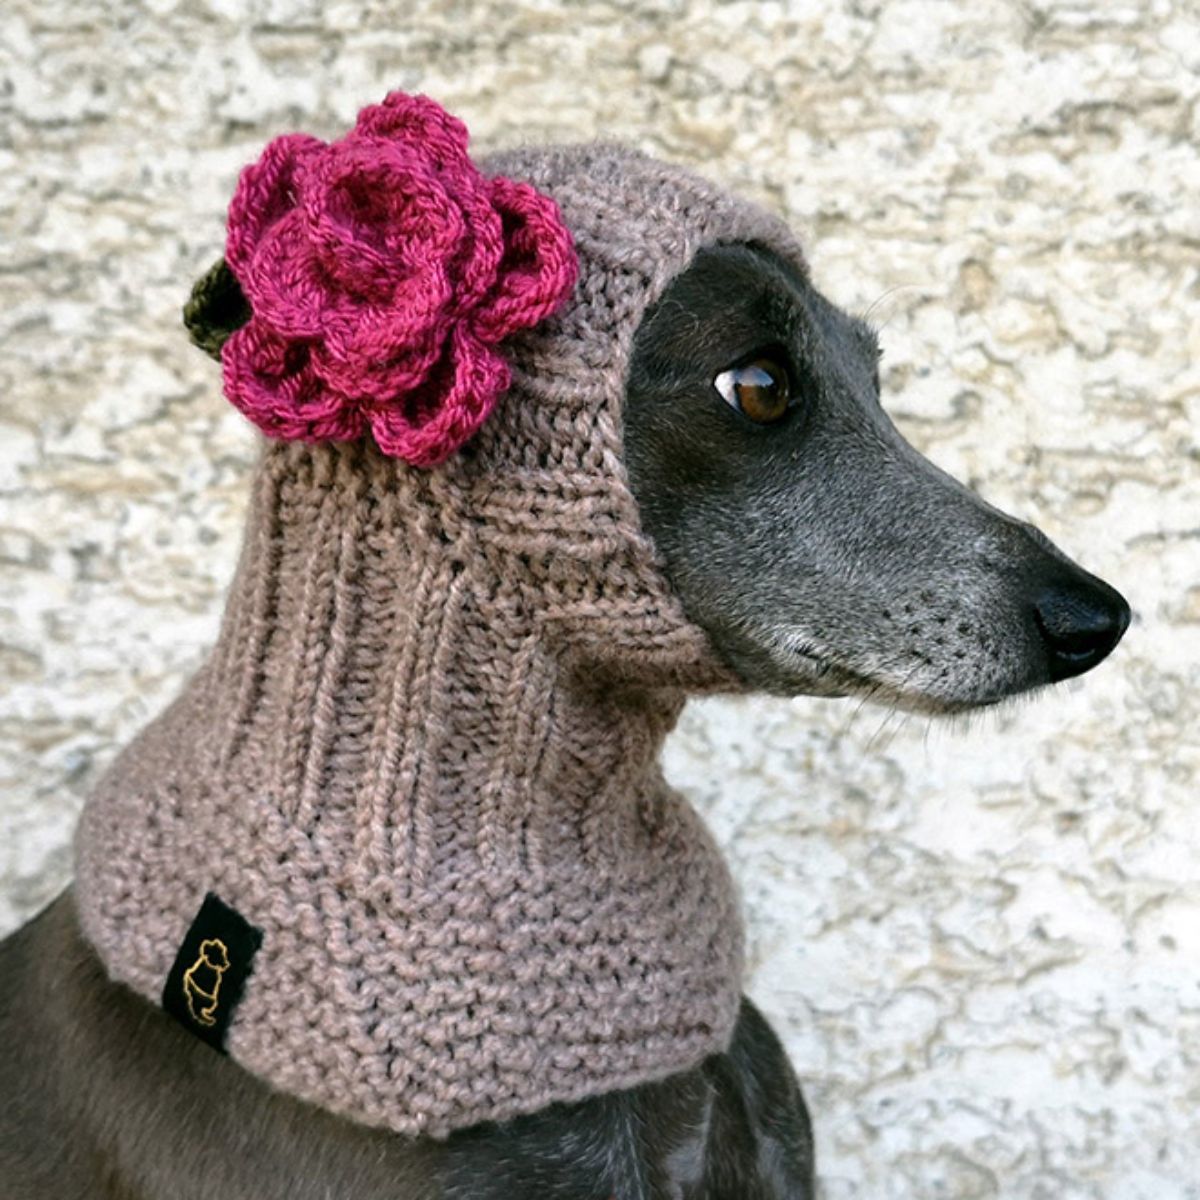 black greyhound wearing a brown crocheted hat down to the neck with a red crochet rose on the side